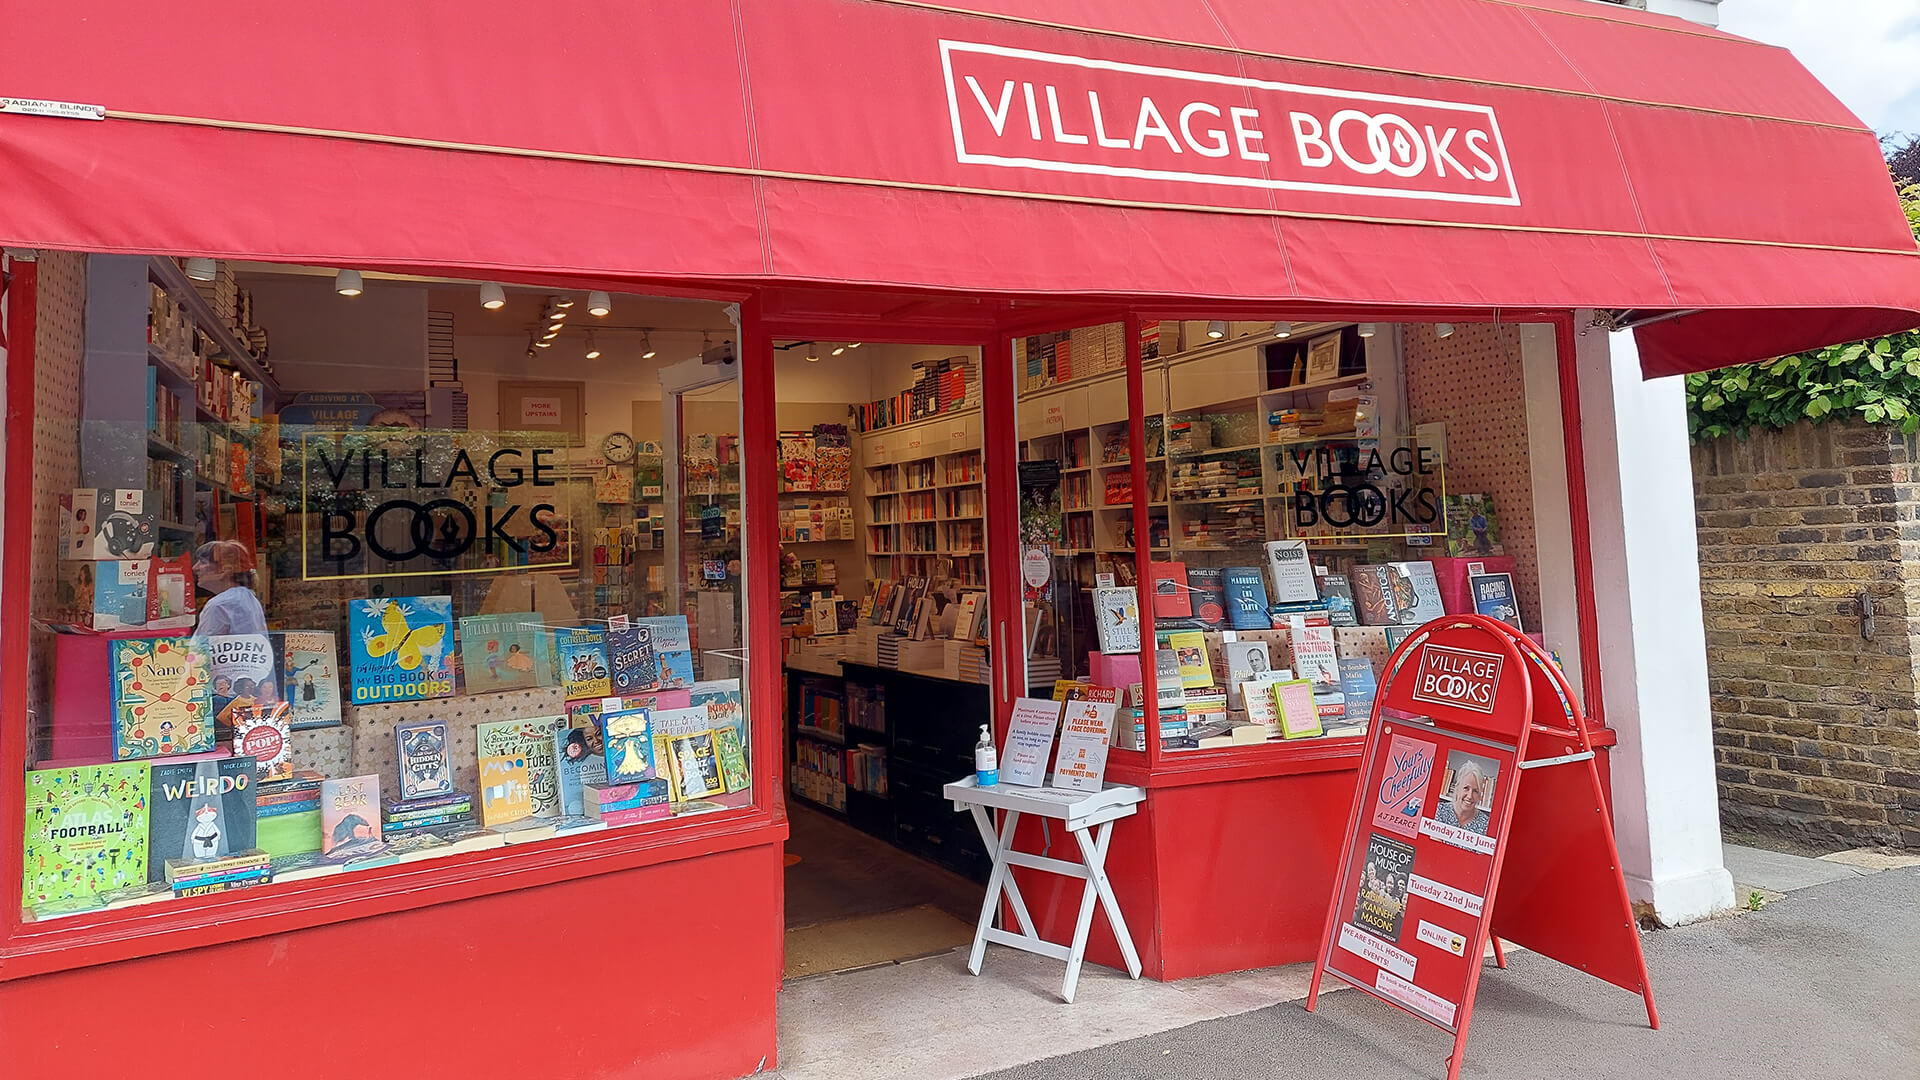 Bookshops report 'strong footfall' and good distribution for the festive period